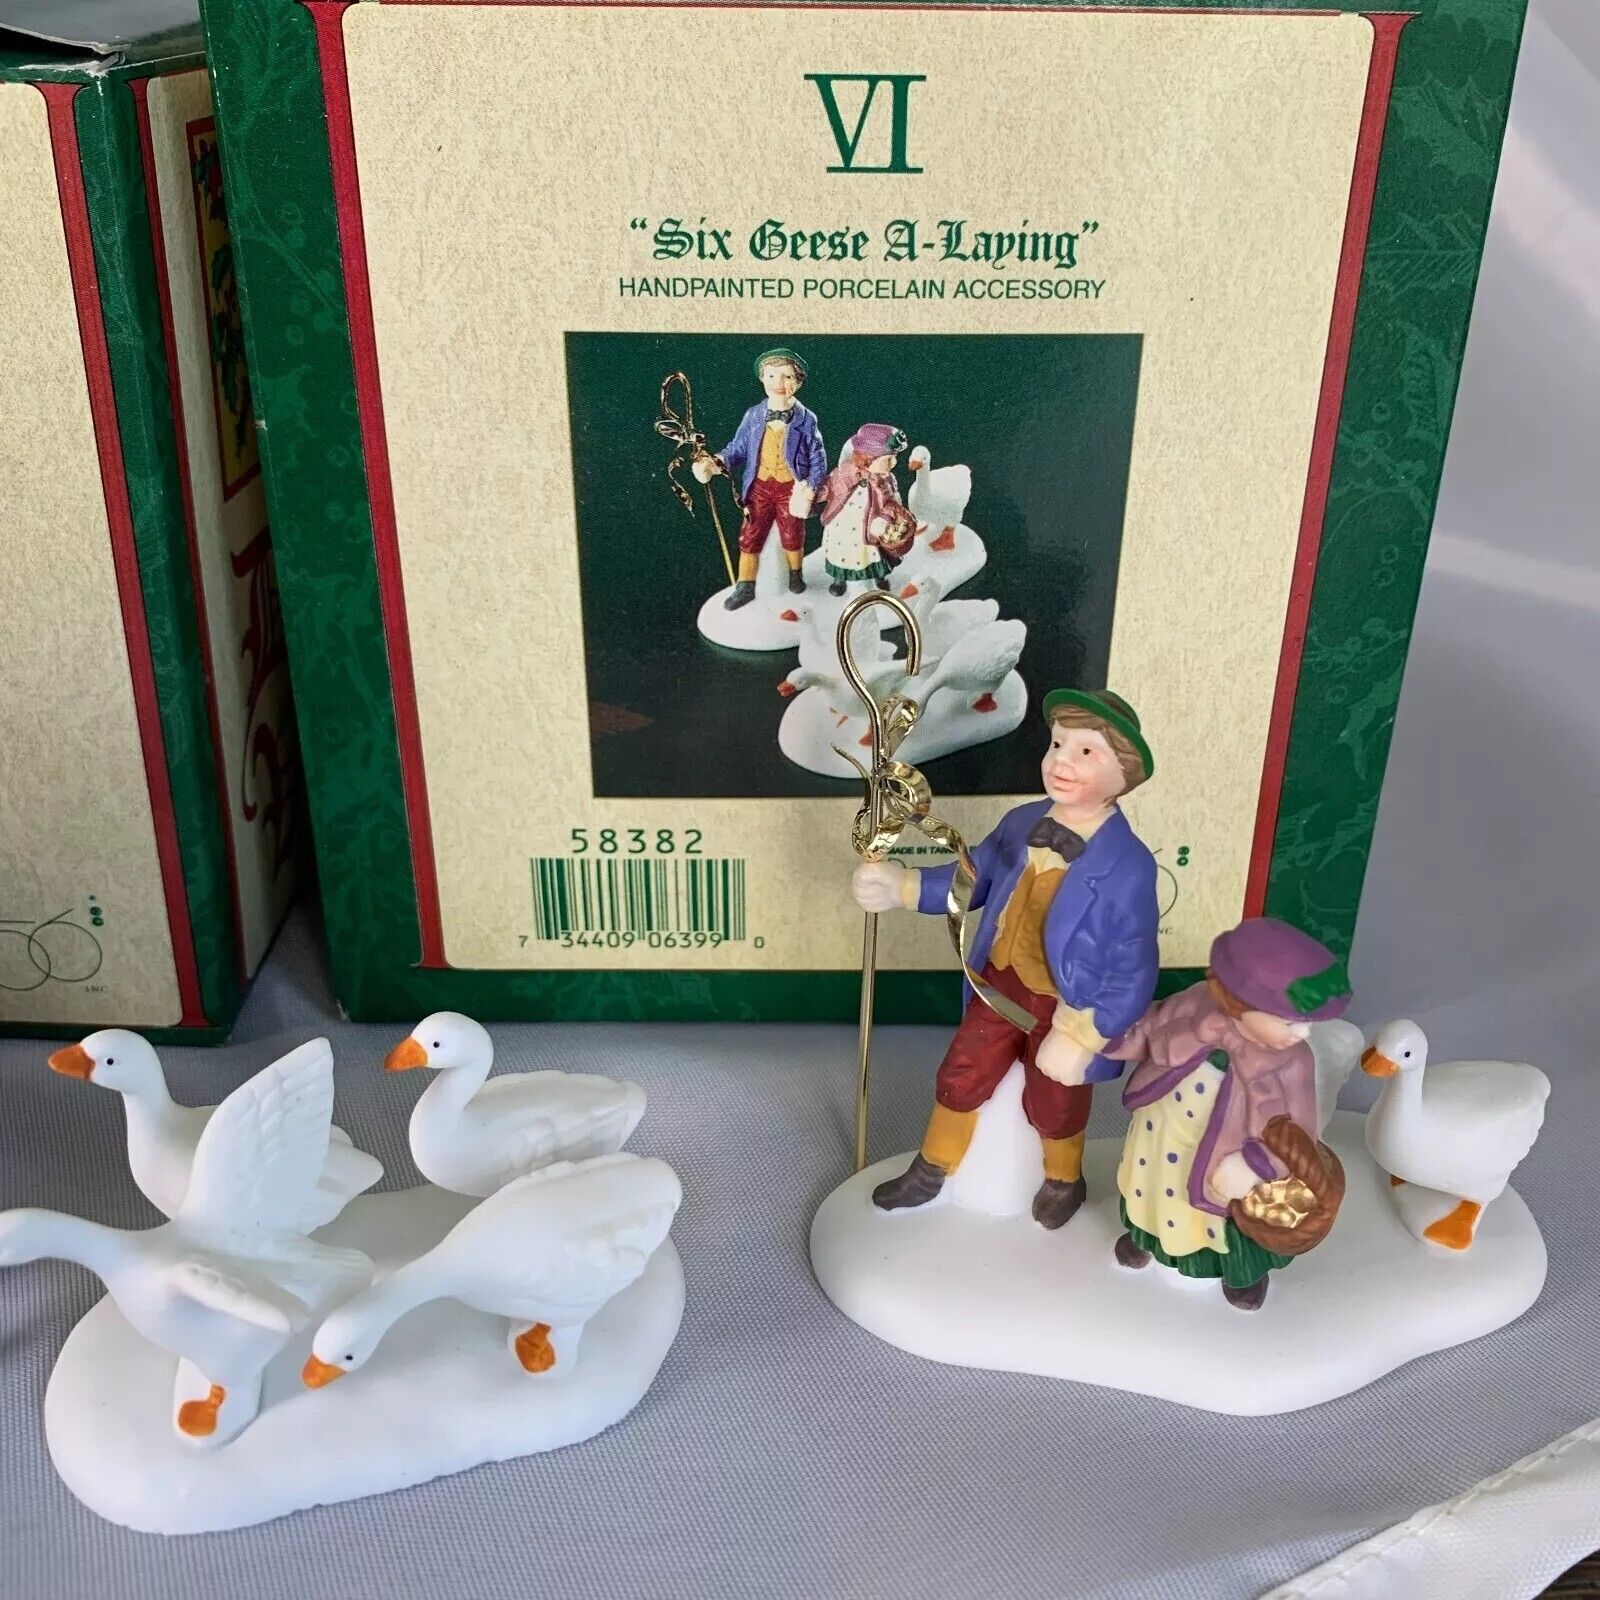 Dept 56 Dickens 12 Days Of Christmas 6 Six Geese a Laying Original Box 